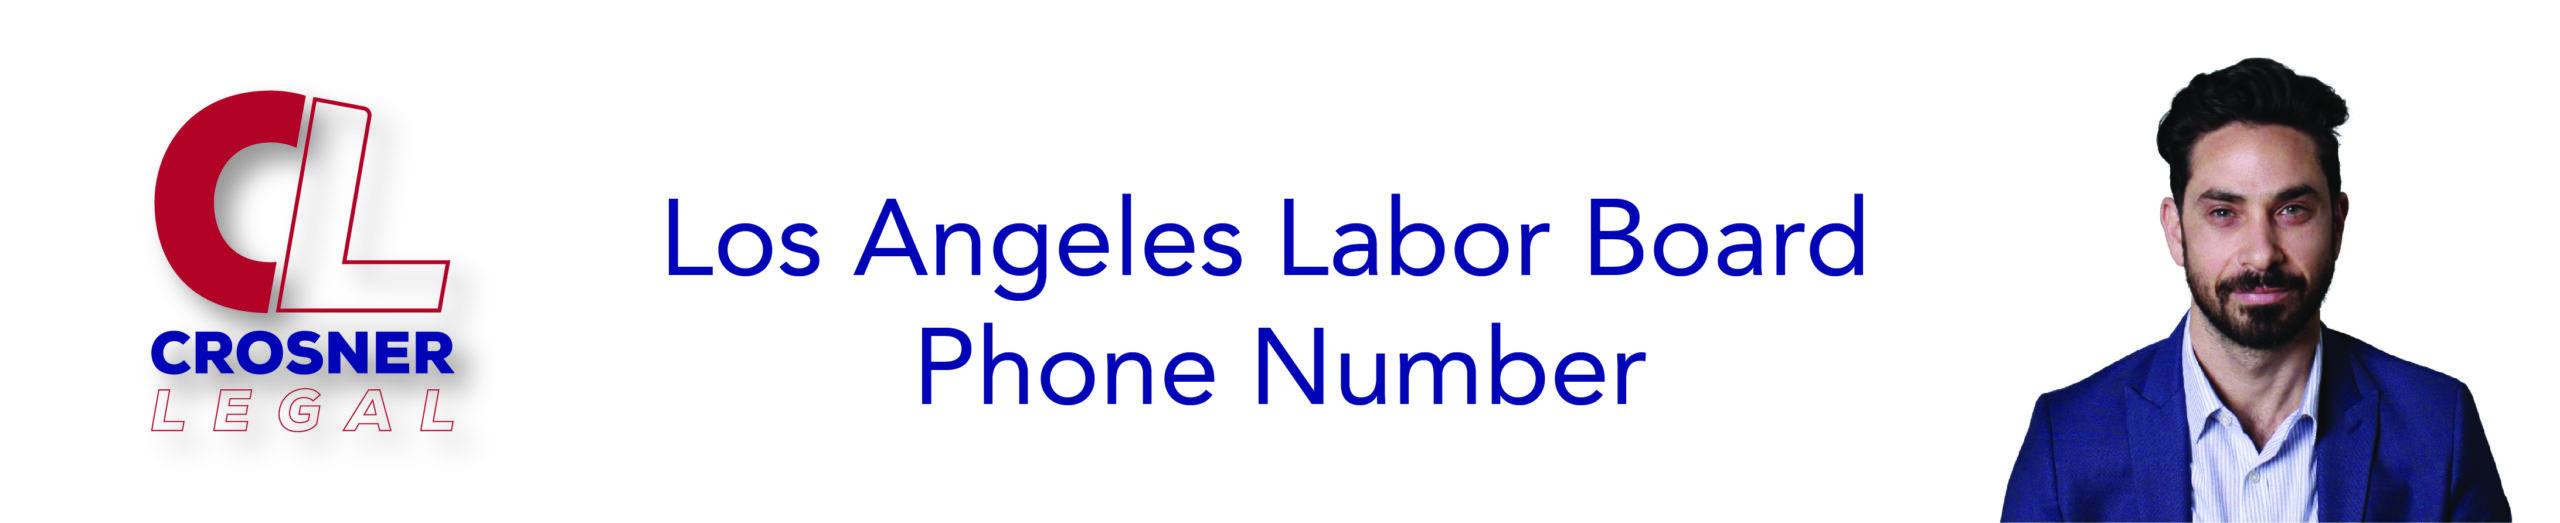 Los Angeles Labor Board Phone Number